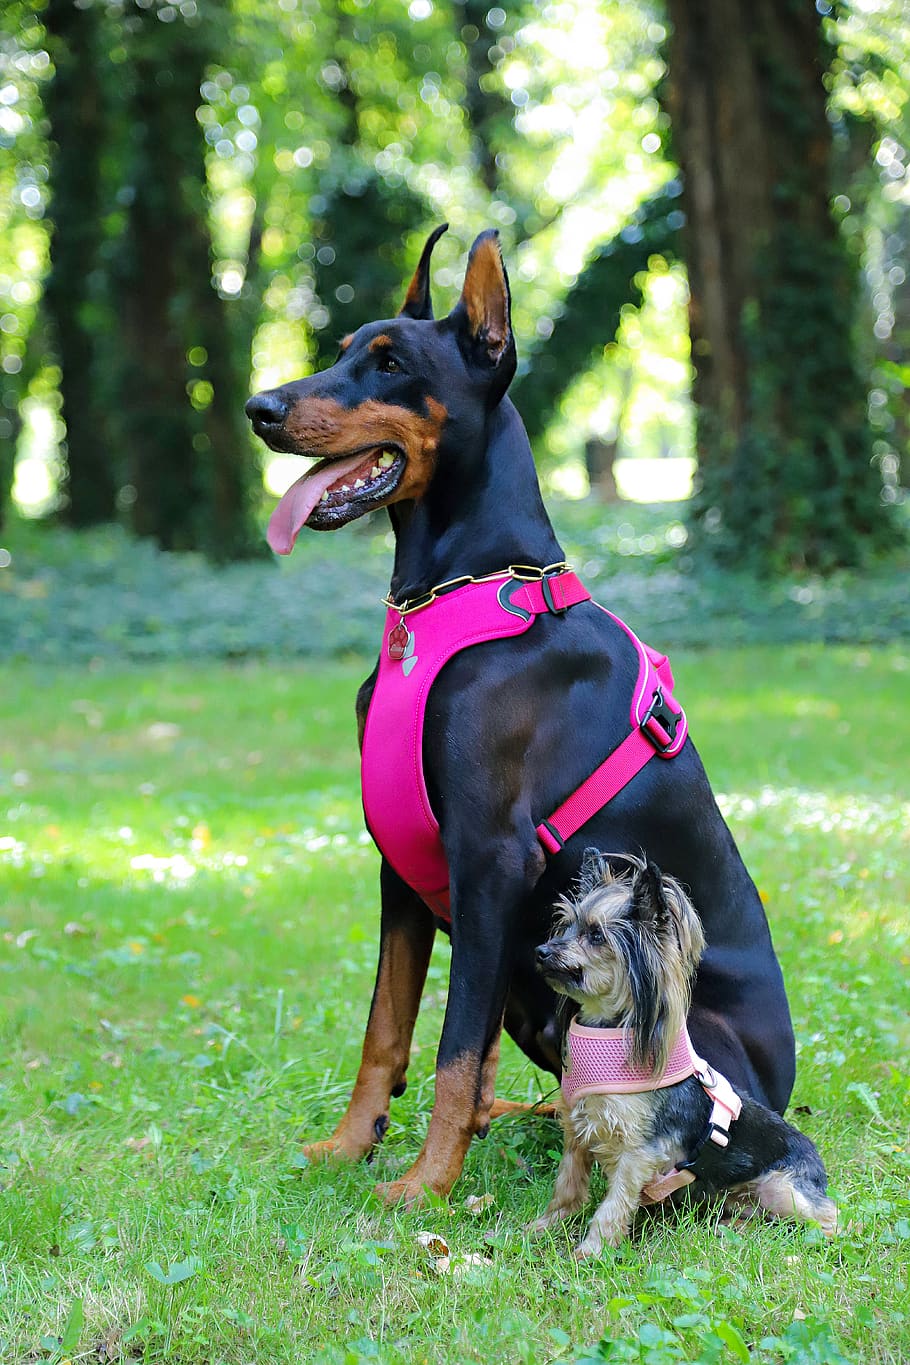 yorkie, doberman, dogs, they are nice, park, harness, pink, mammal, domestic, canine